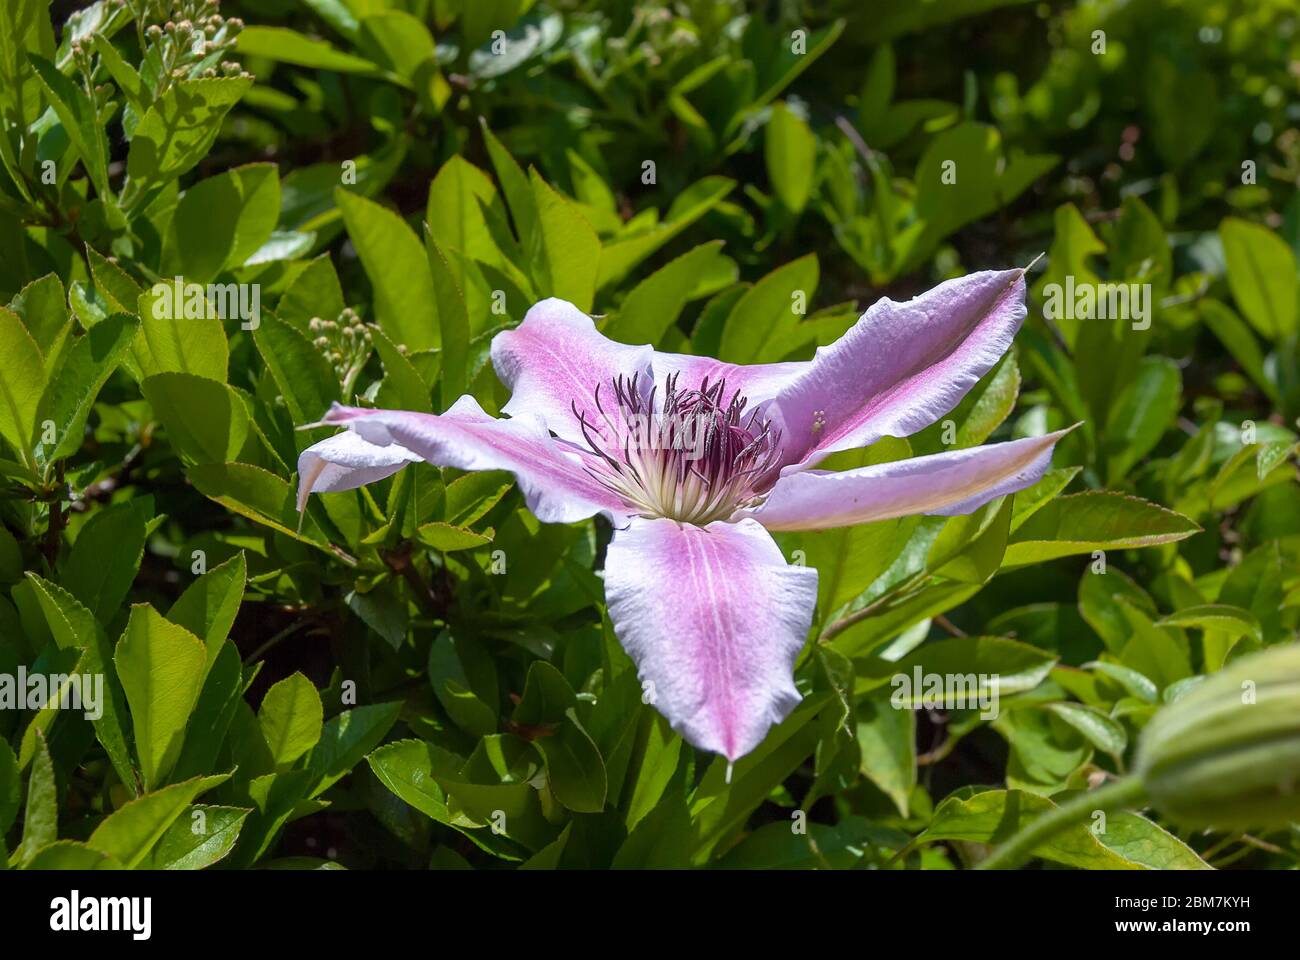 A flower on a Clematis Lanuginosa flowering vine Stock Photo